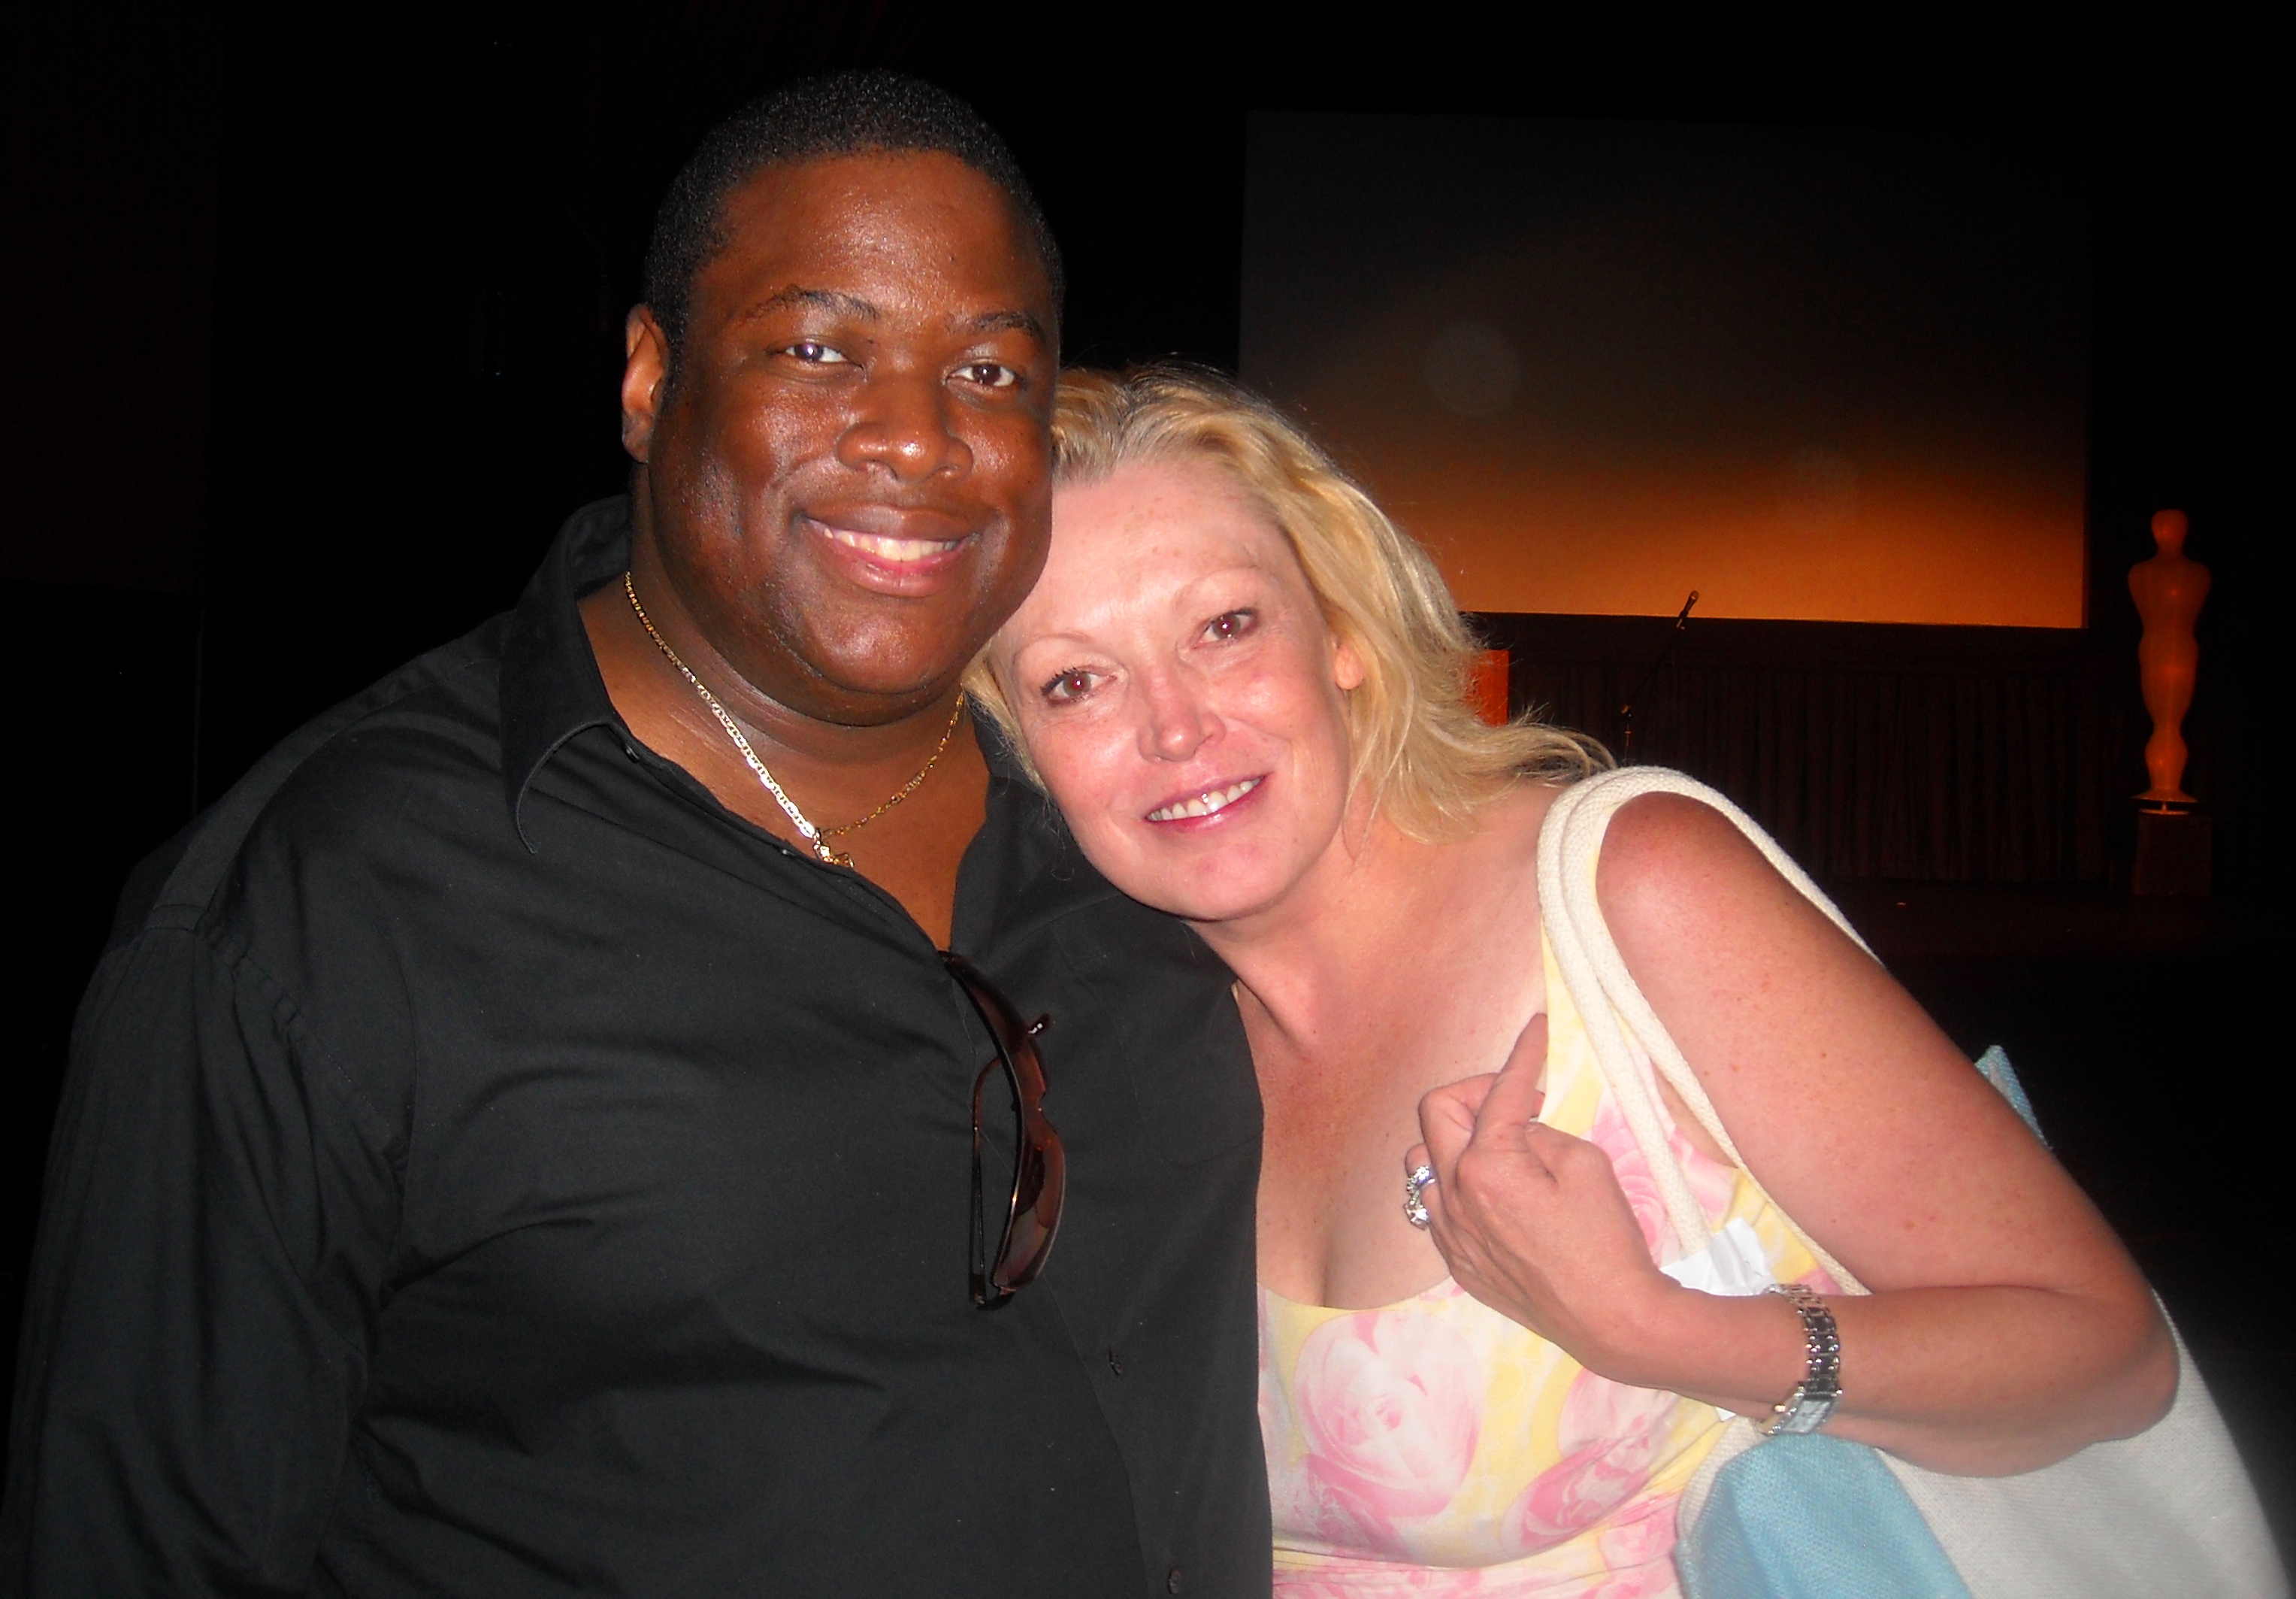 Michael J. Arbouet and Cathy Moriarty at the 13th Annual Long Island International Film Expo - Awards Ceremony July 18, 2010 - New York, USA